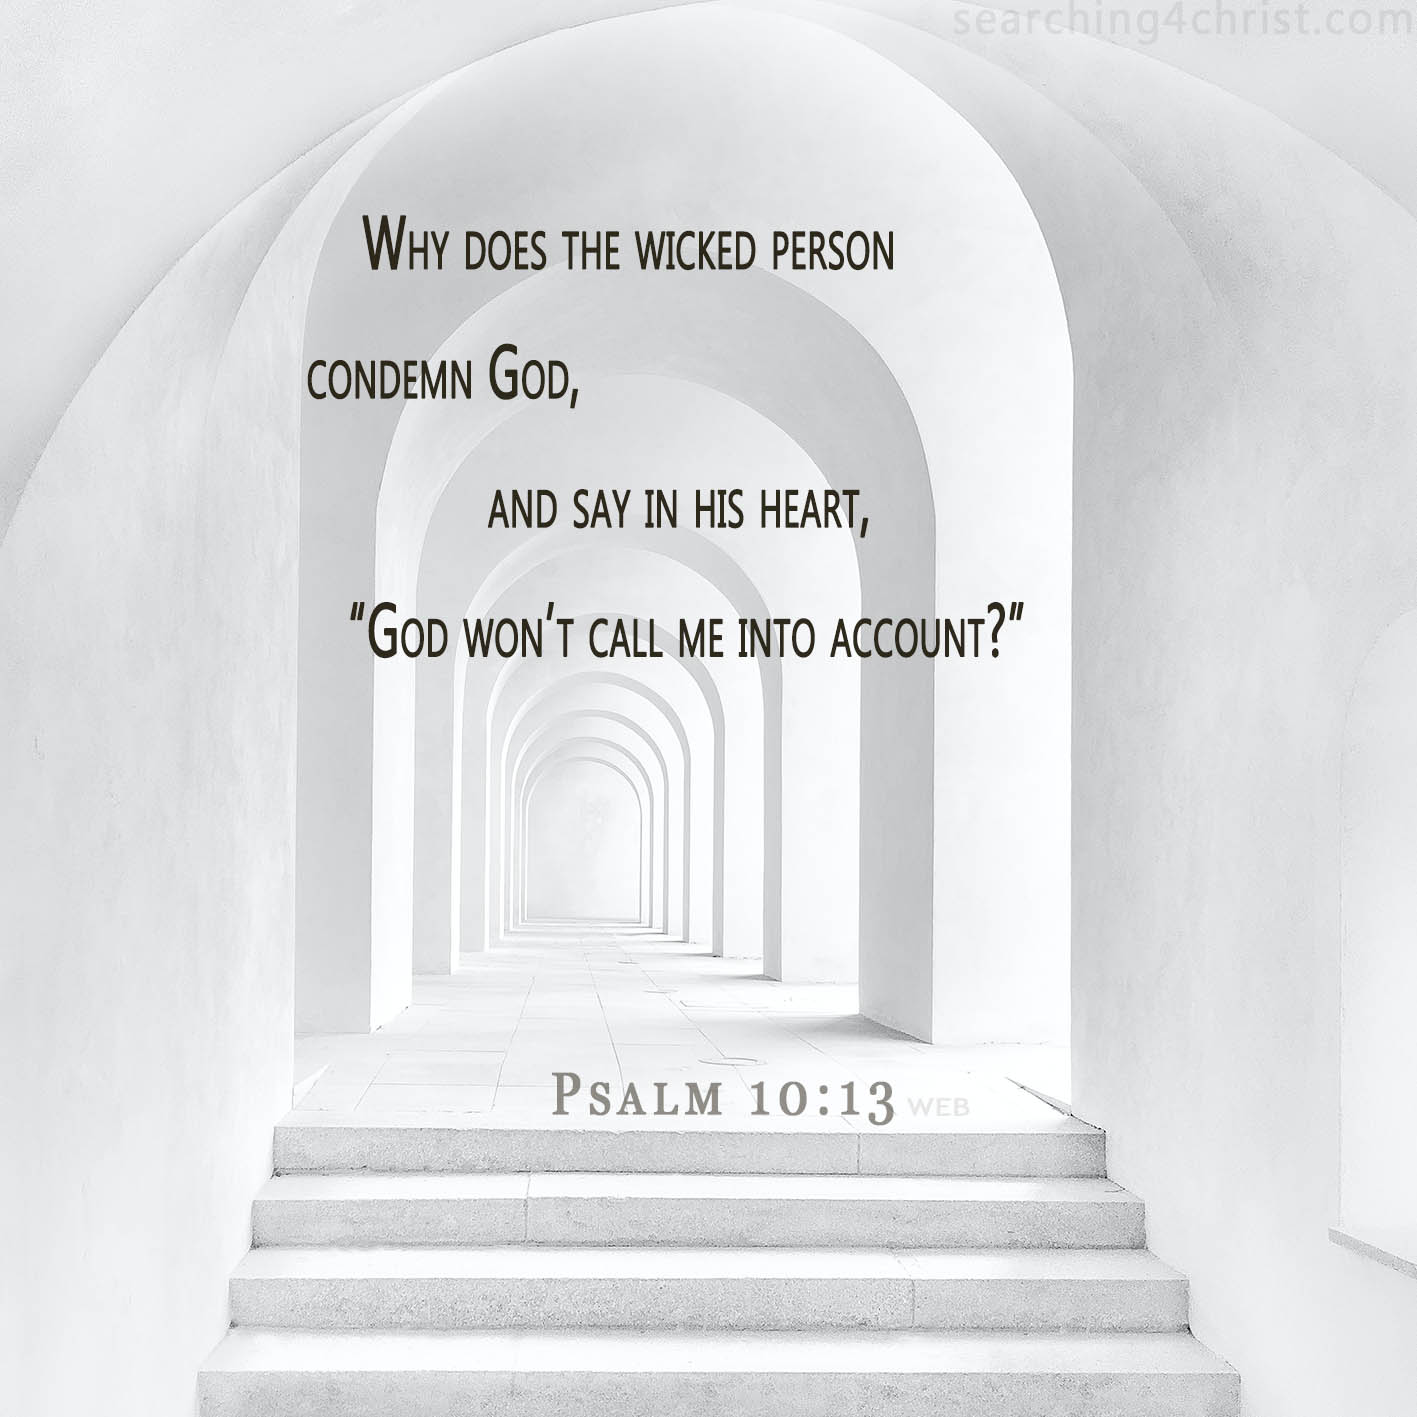 Why does the wicked person condemn God, and say in his heart, “God won’t call me into account?” Psalm 10:13